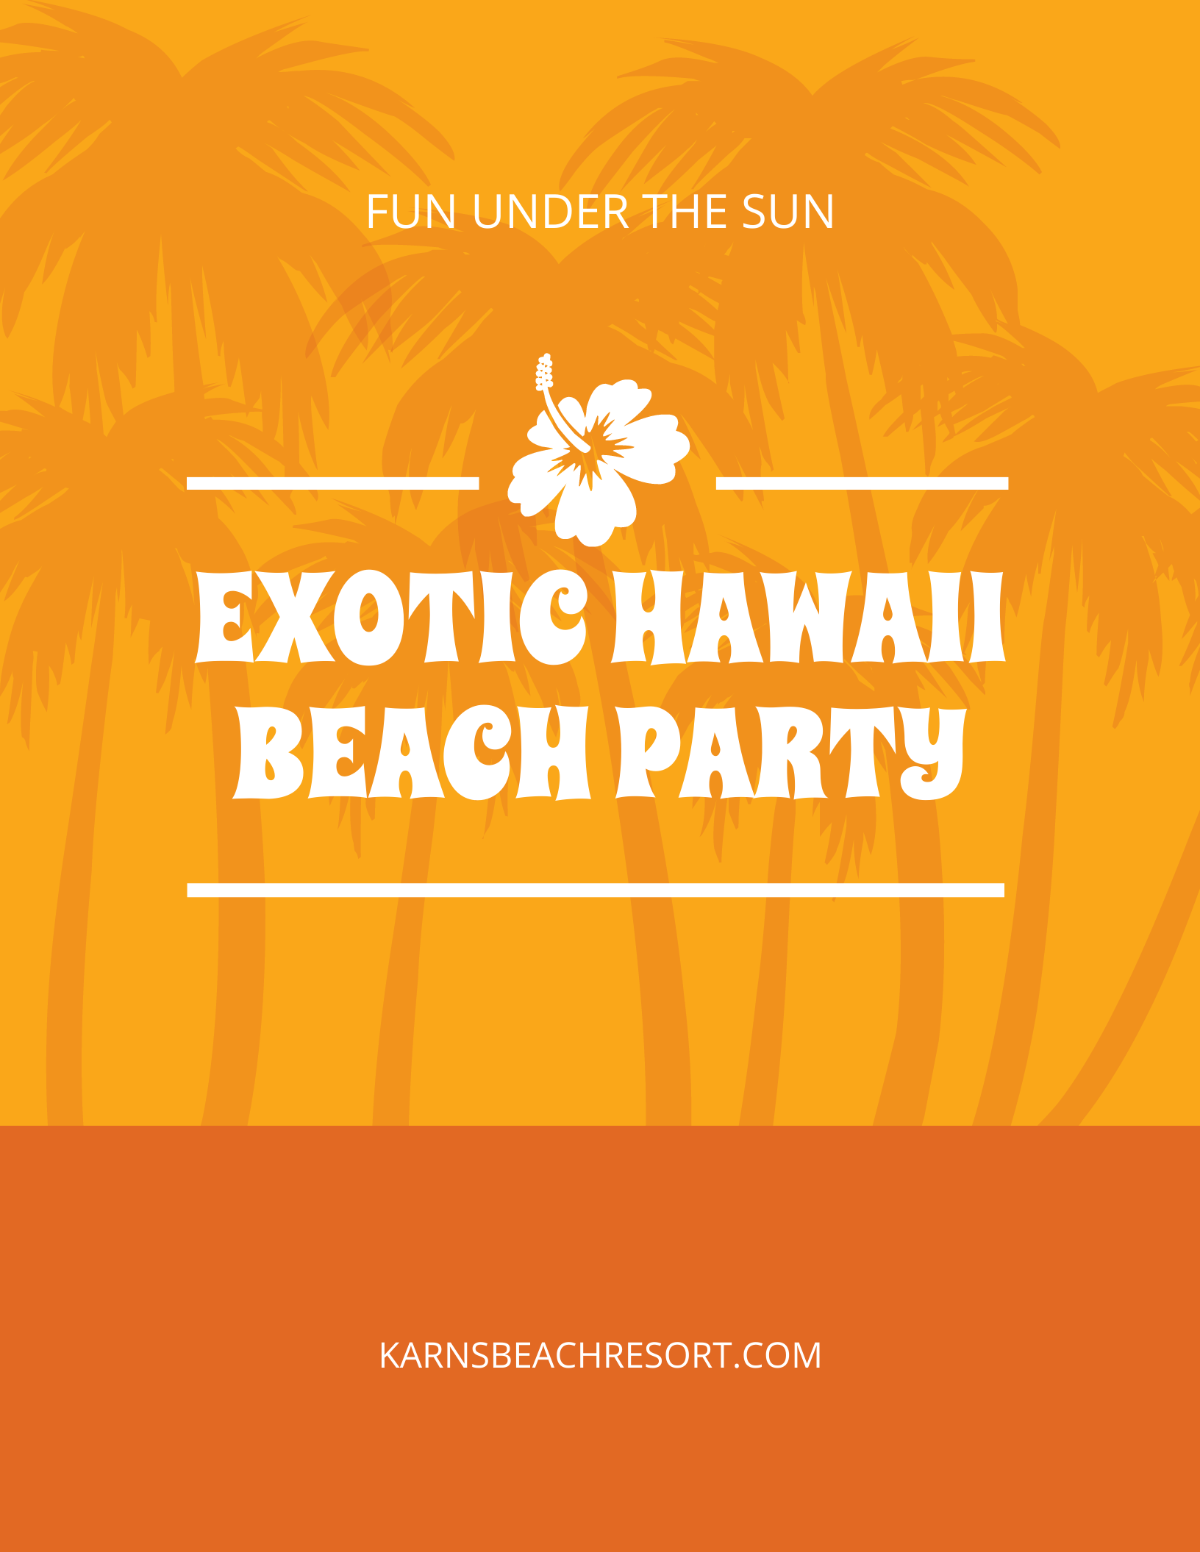 Free Hawaii Beach Party Flyer Template